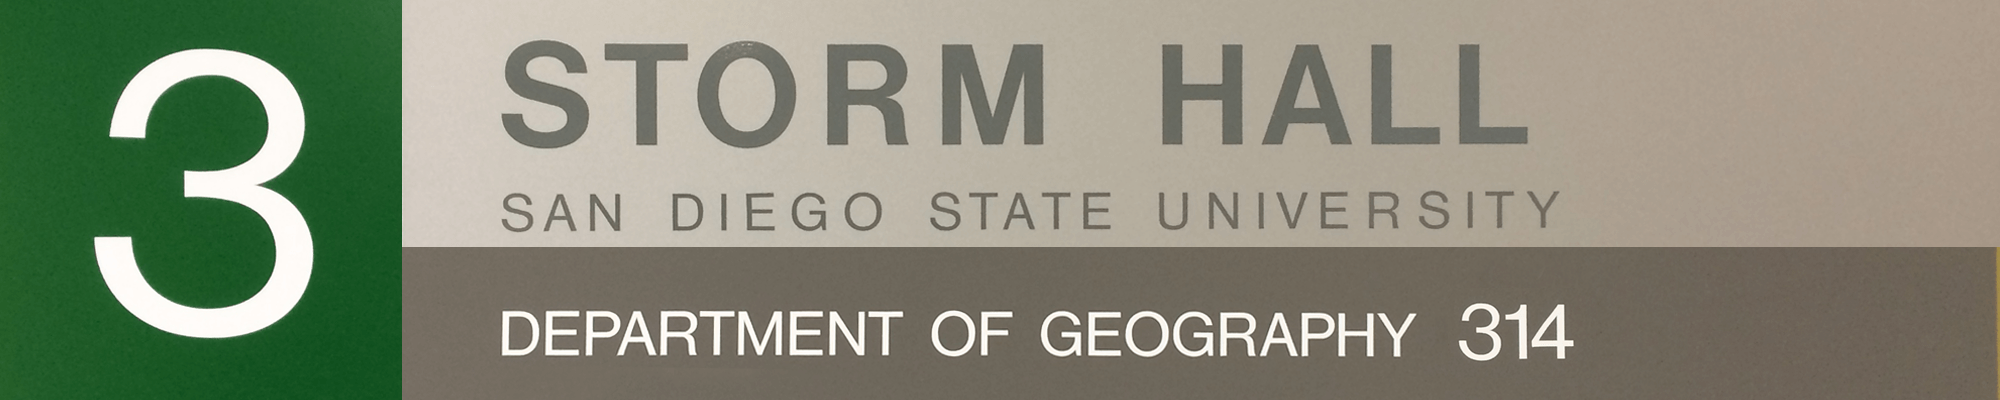 Floor 3 Storm Hall, San Diego State University, Geography, Room 314